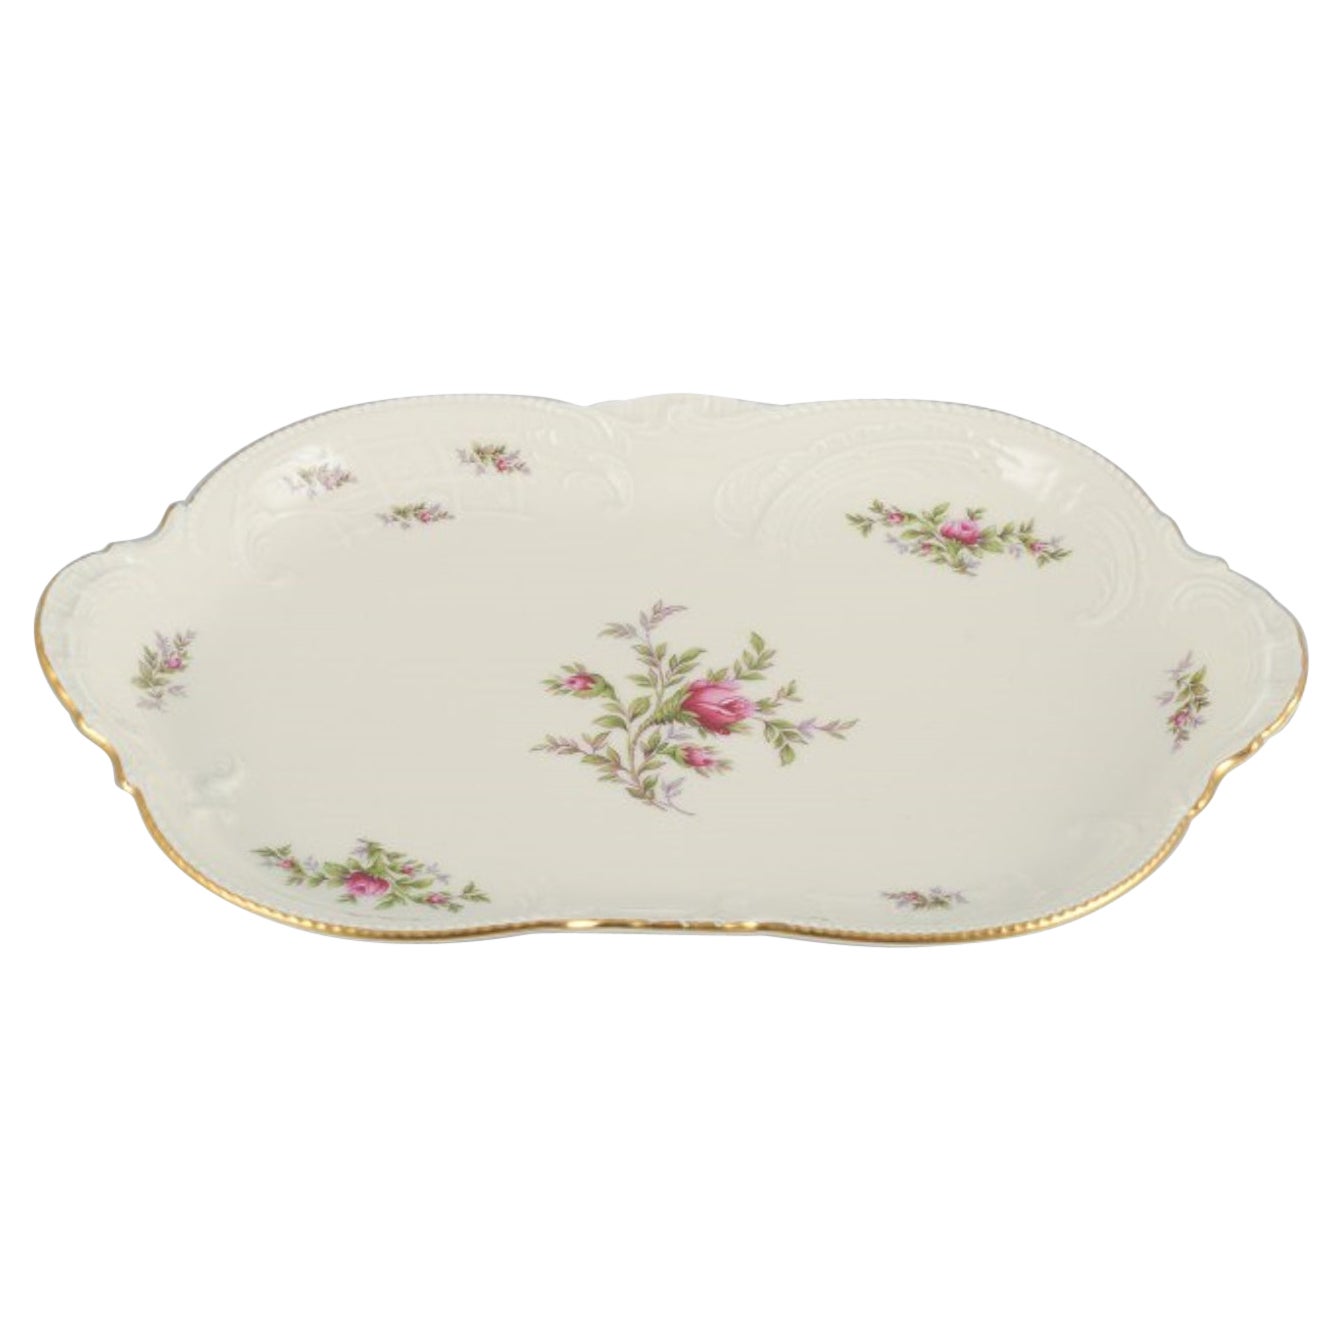 Rosenthal, Germany, "Sanssouci", Cream-Coloured Serving Dish with Flowers For Sale